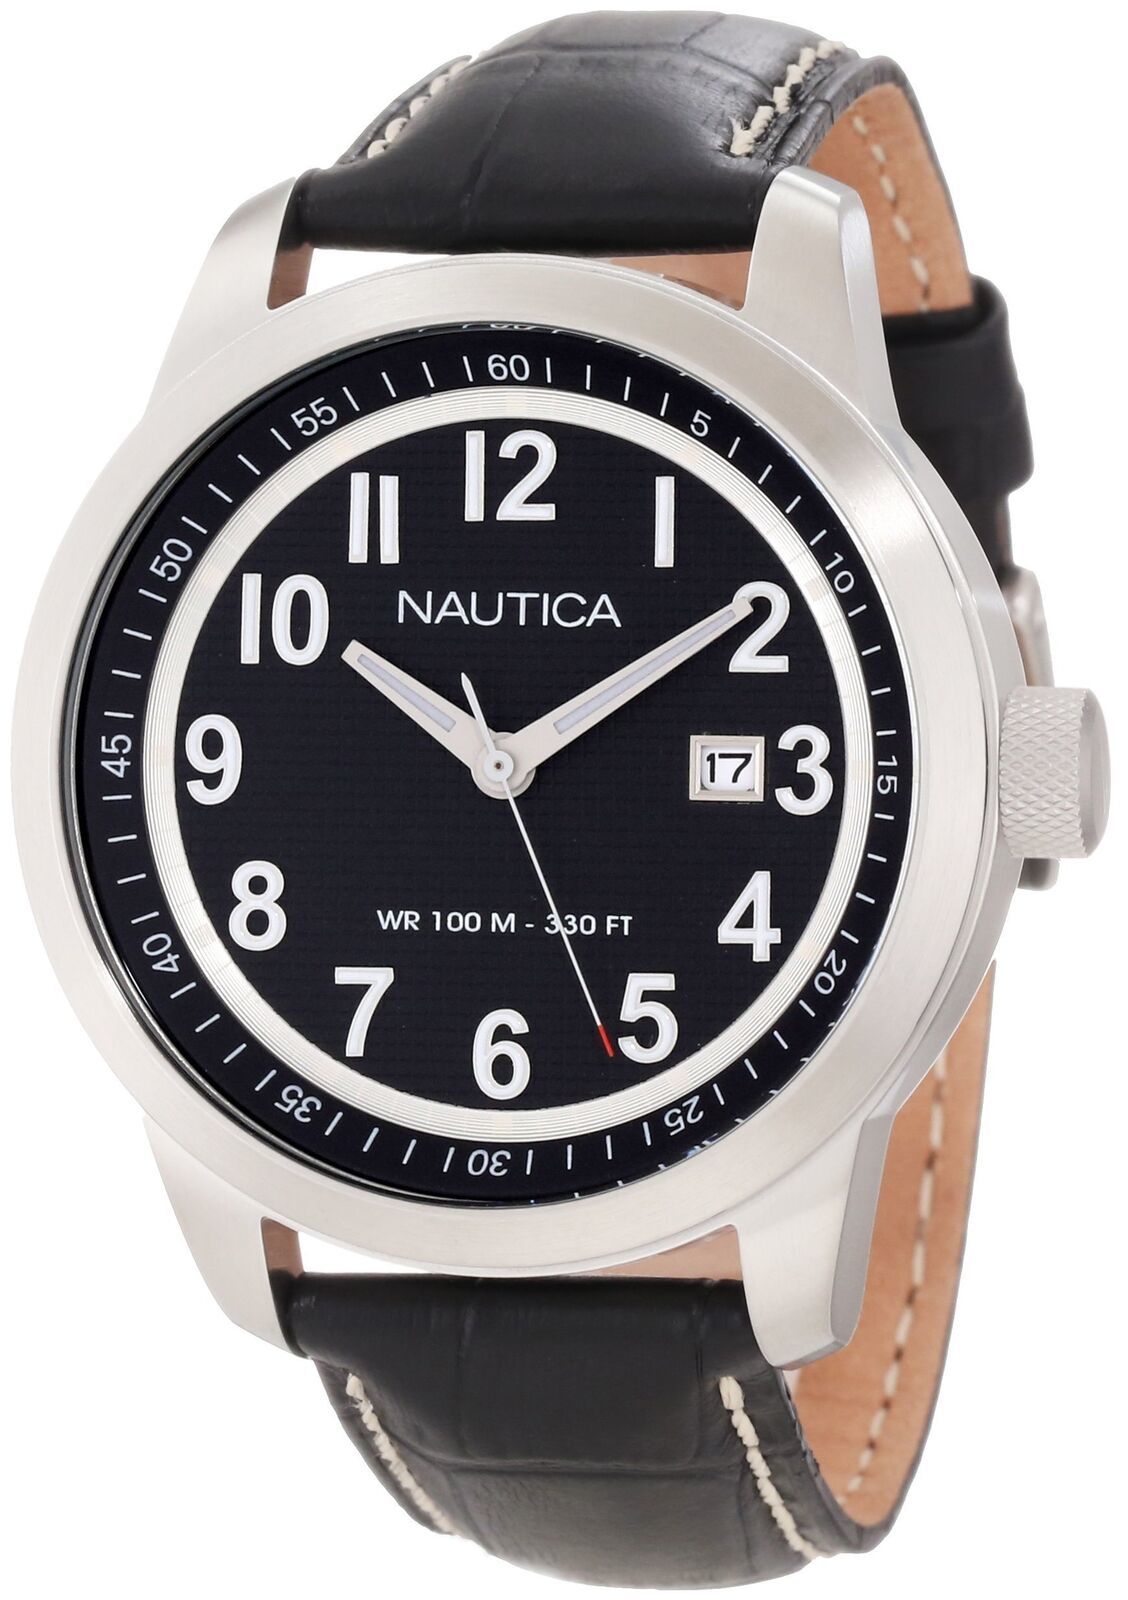 Primary image for Nautica Men's N13604G Classic Analog Date Watch - Black Dial Black Leather Band